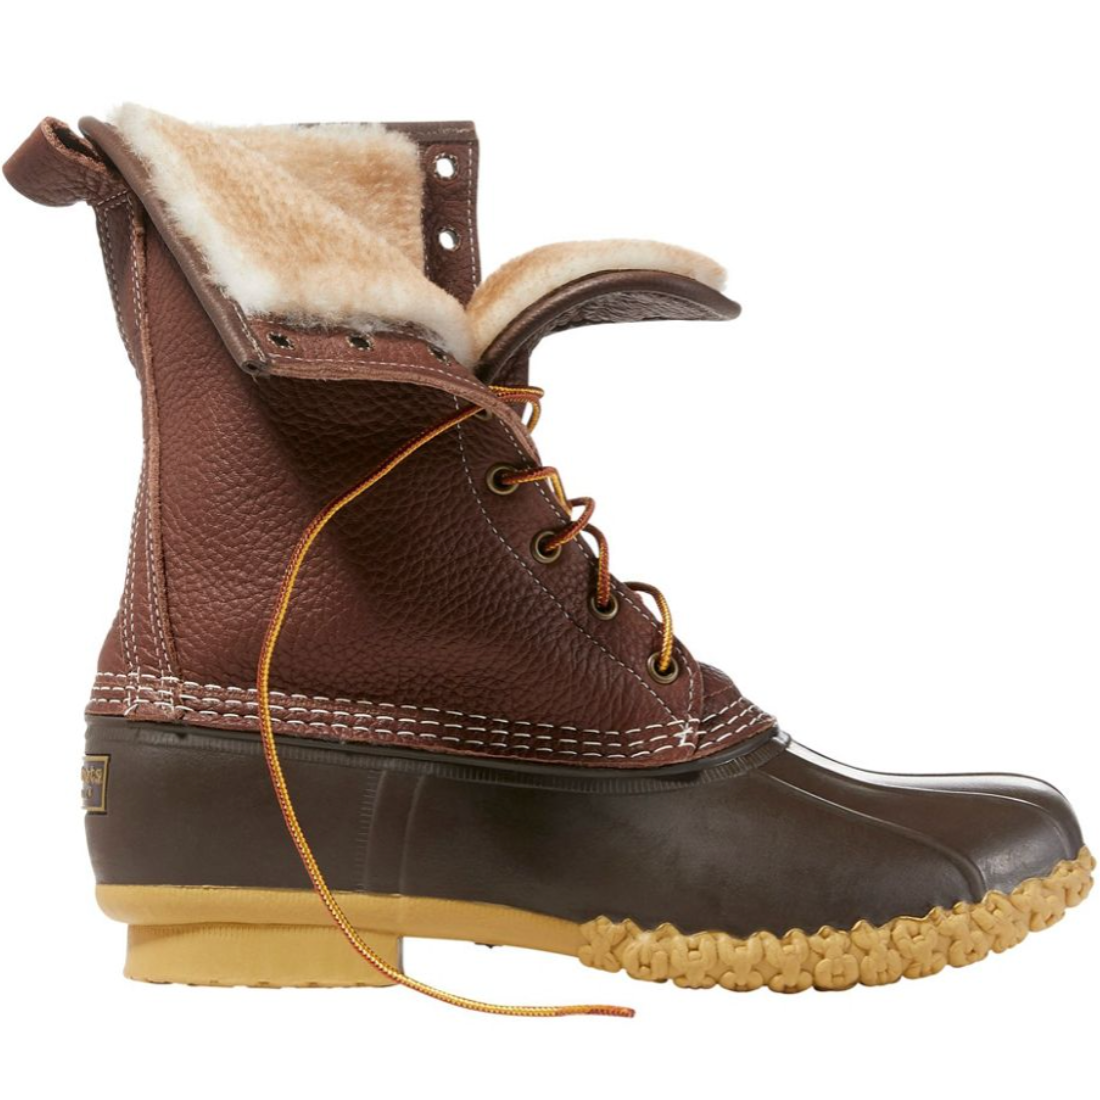 Best Winter Boots for Men Blundstone, Clarks, Dr. Martens and More | Entertainment Tonight